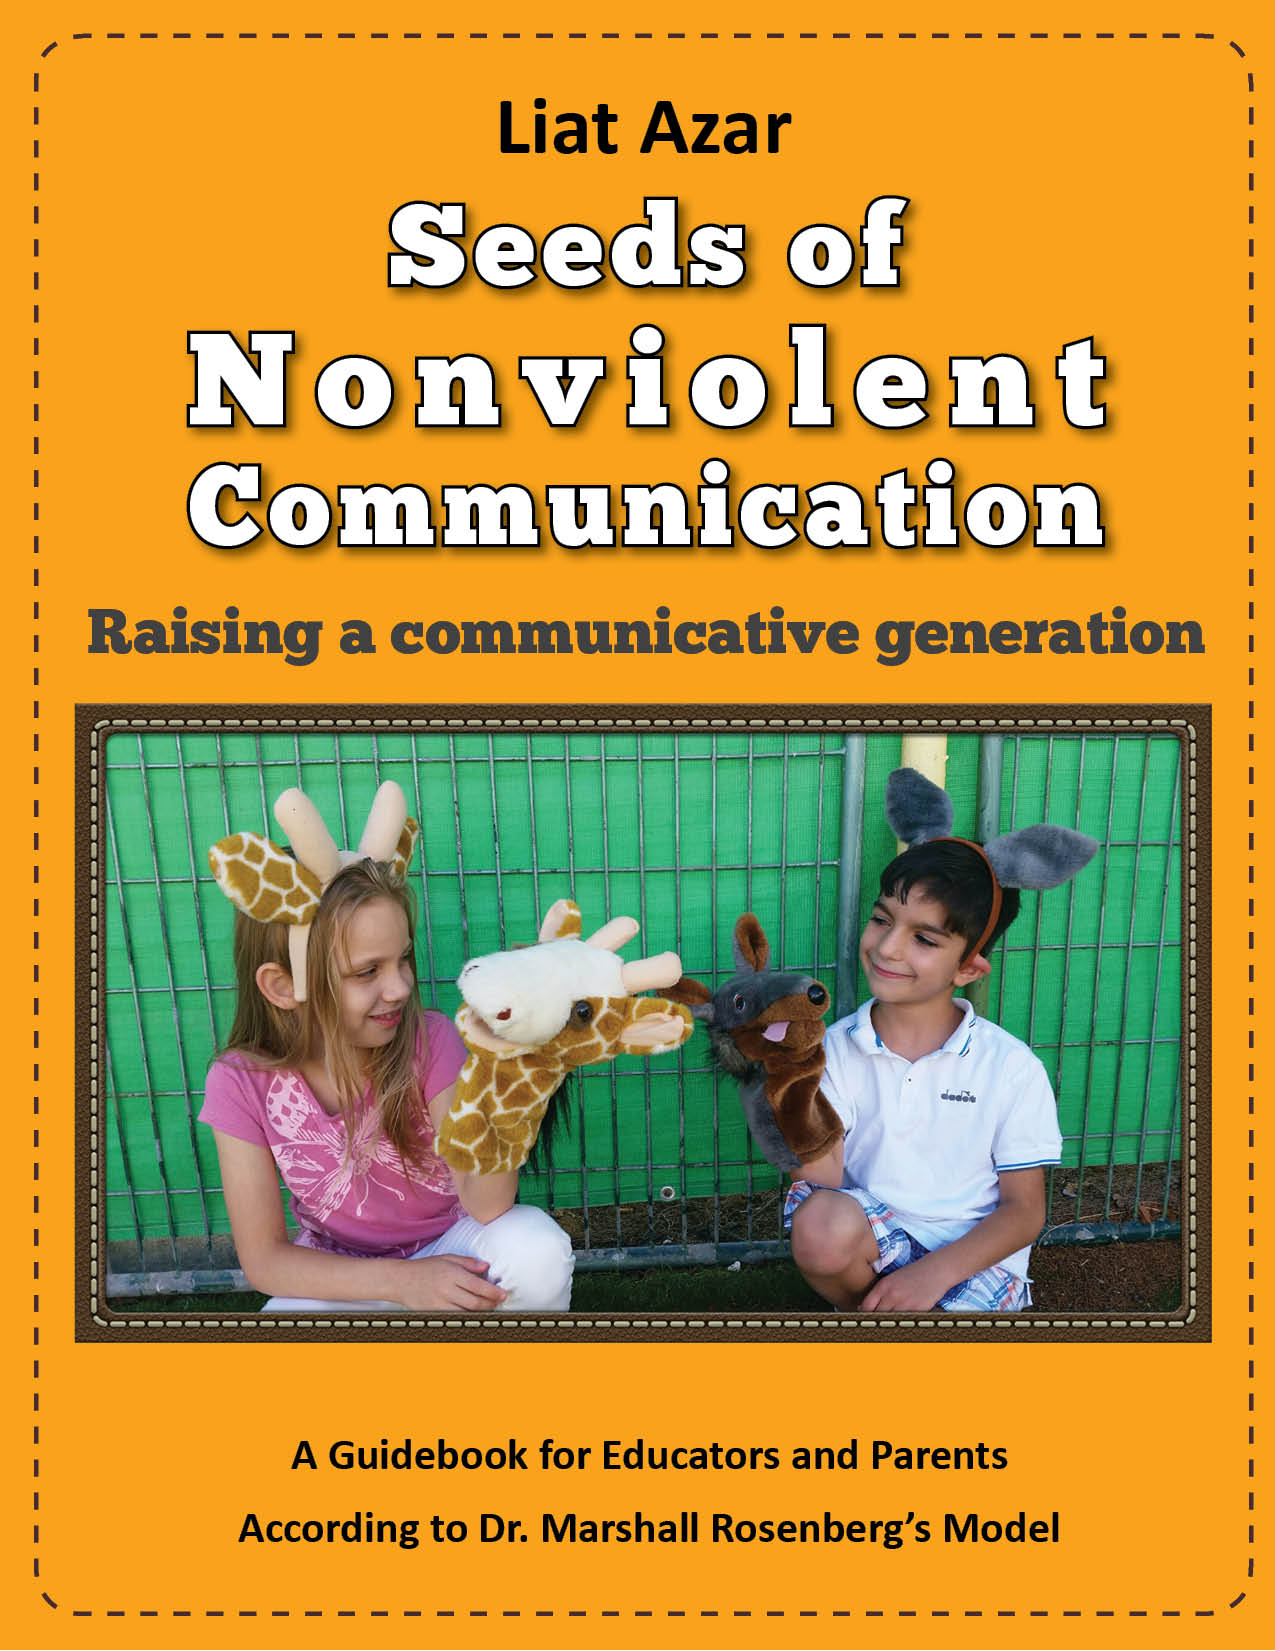 FREE: Seeds of Nonviolent Communication – Raising a communicative generation by LIat Azar